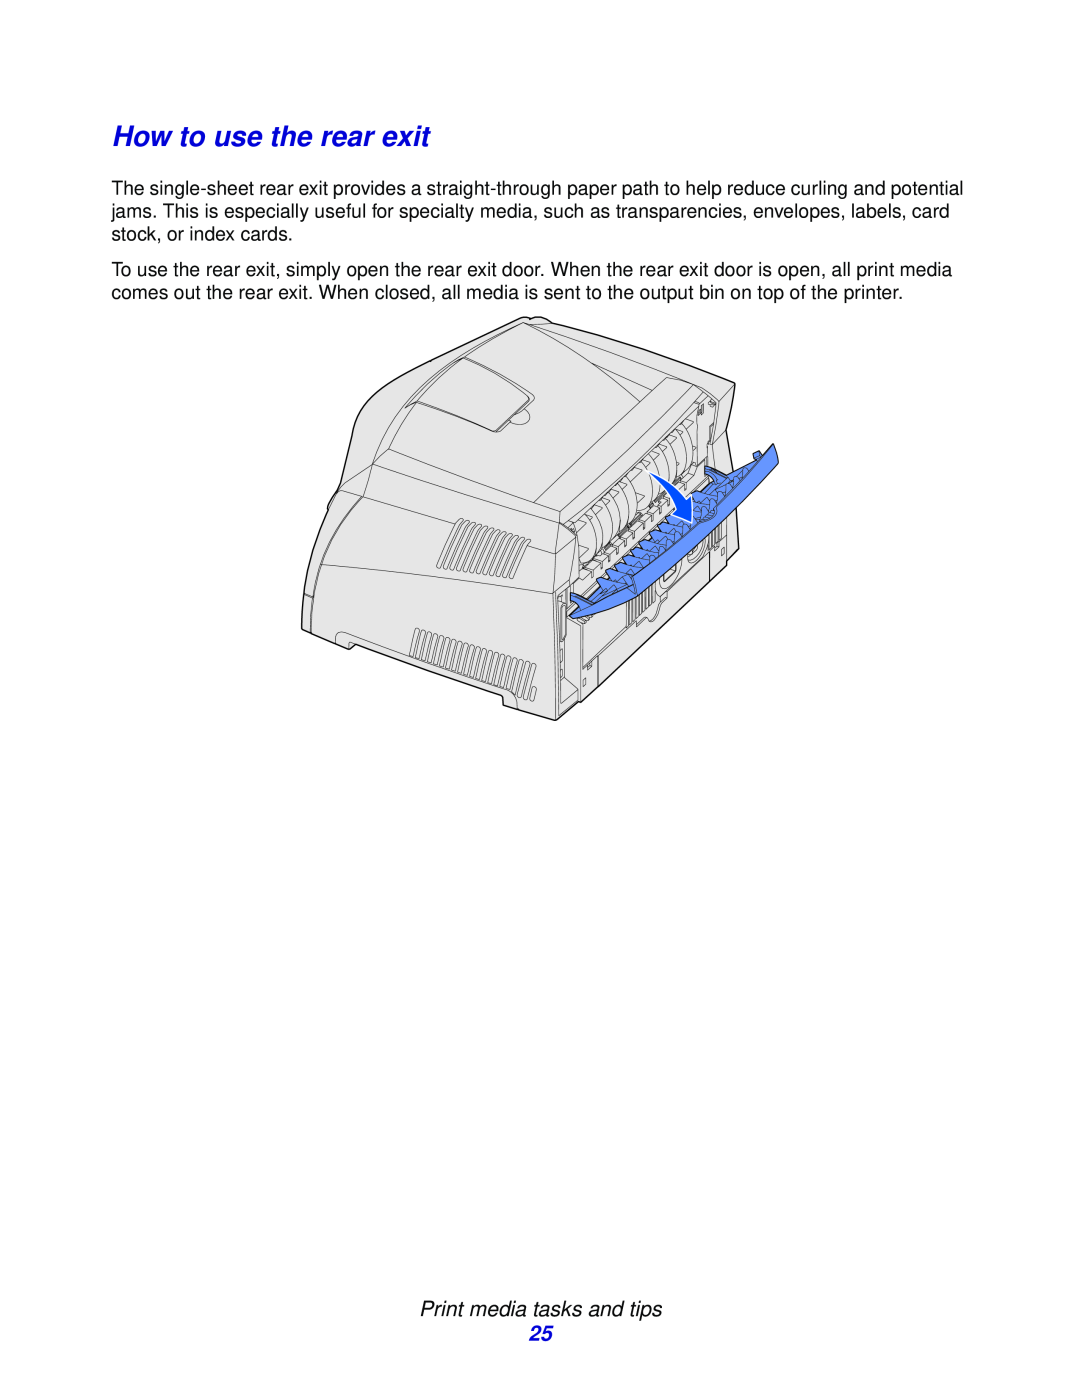 Lexmark E332n, 232, 230 manual How to use the rear exit, Print media tasks and tips 